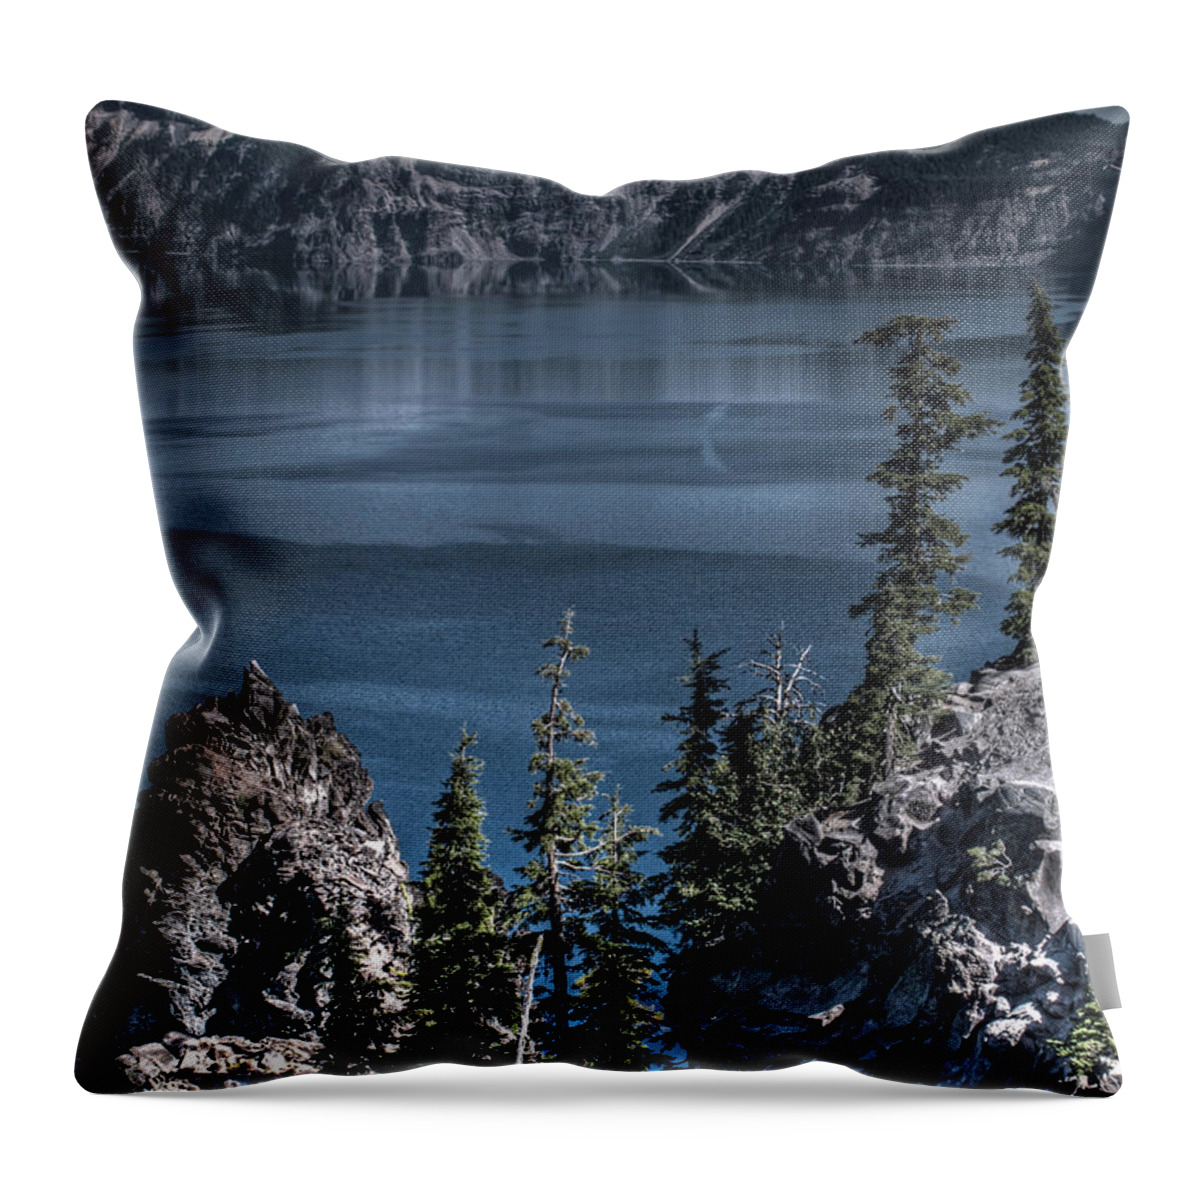 Crater Lake Oregon Throw Pillow featuring the photograph Crater Lake 4 by Jacklyn Duryea Fraizer